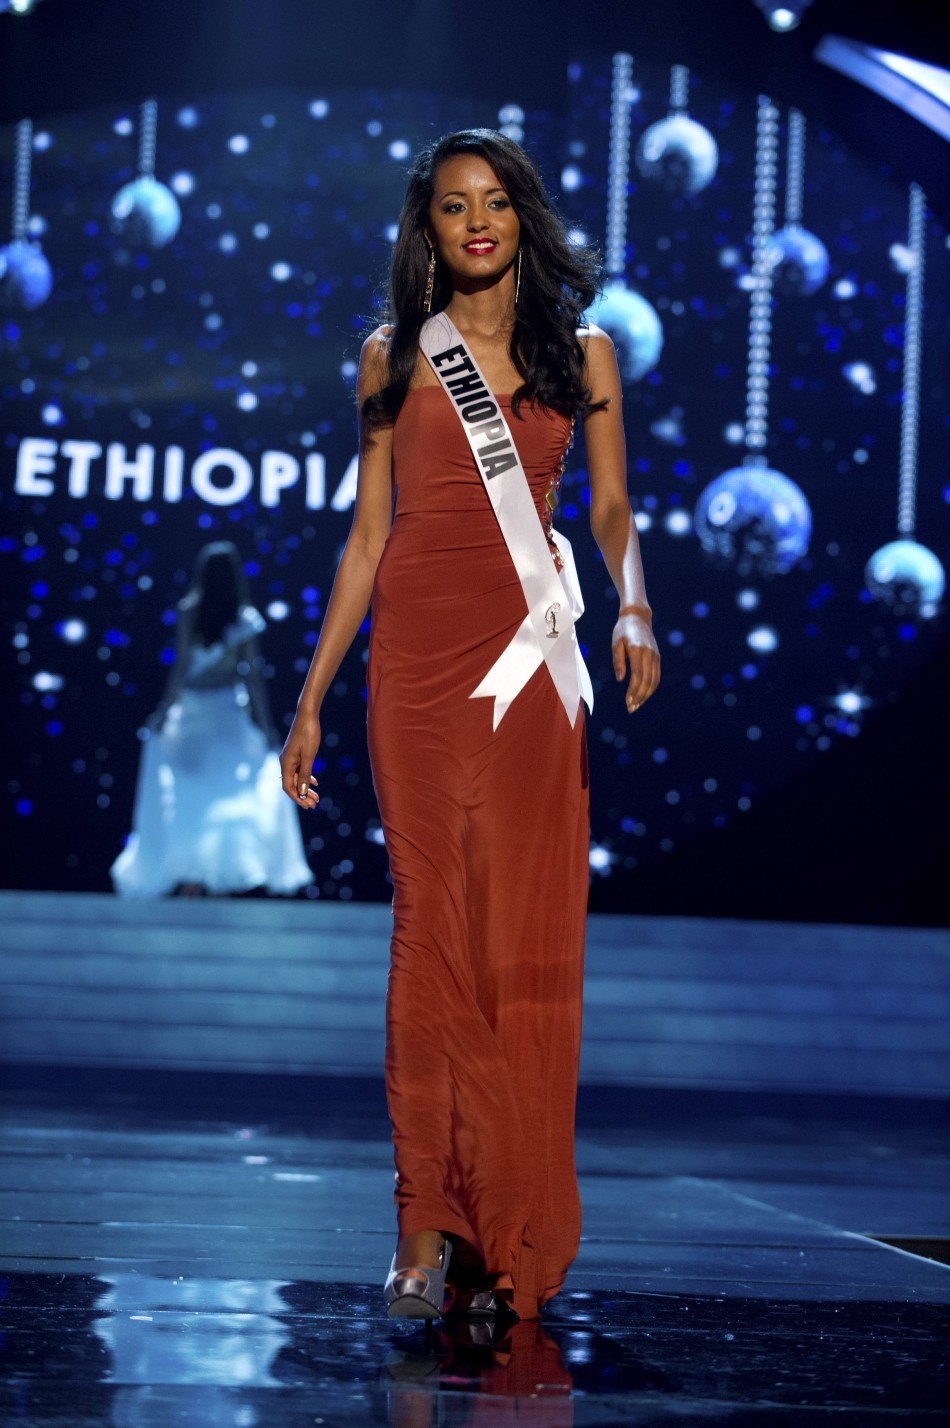 Miss Ethiopia 2012 Getachew competes in an evening gown of her choice during the Evening Gown Competition of the 2012 Miss Universe Presentation Show in Las Vegas